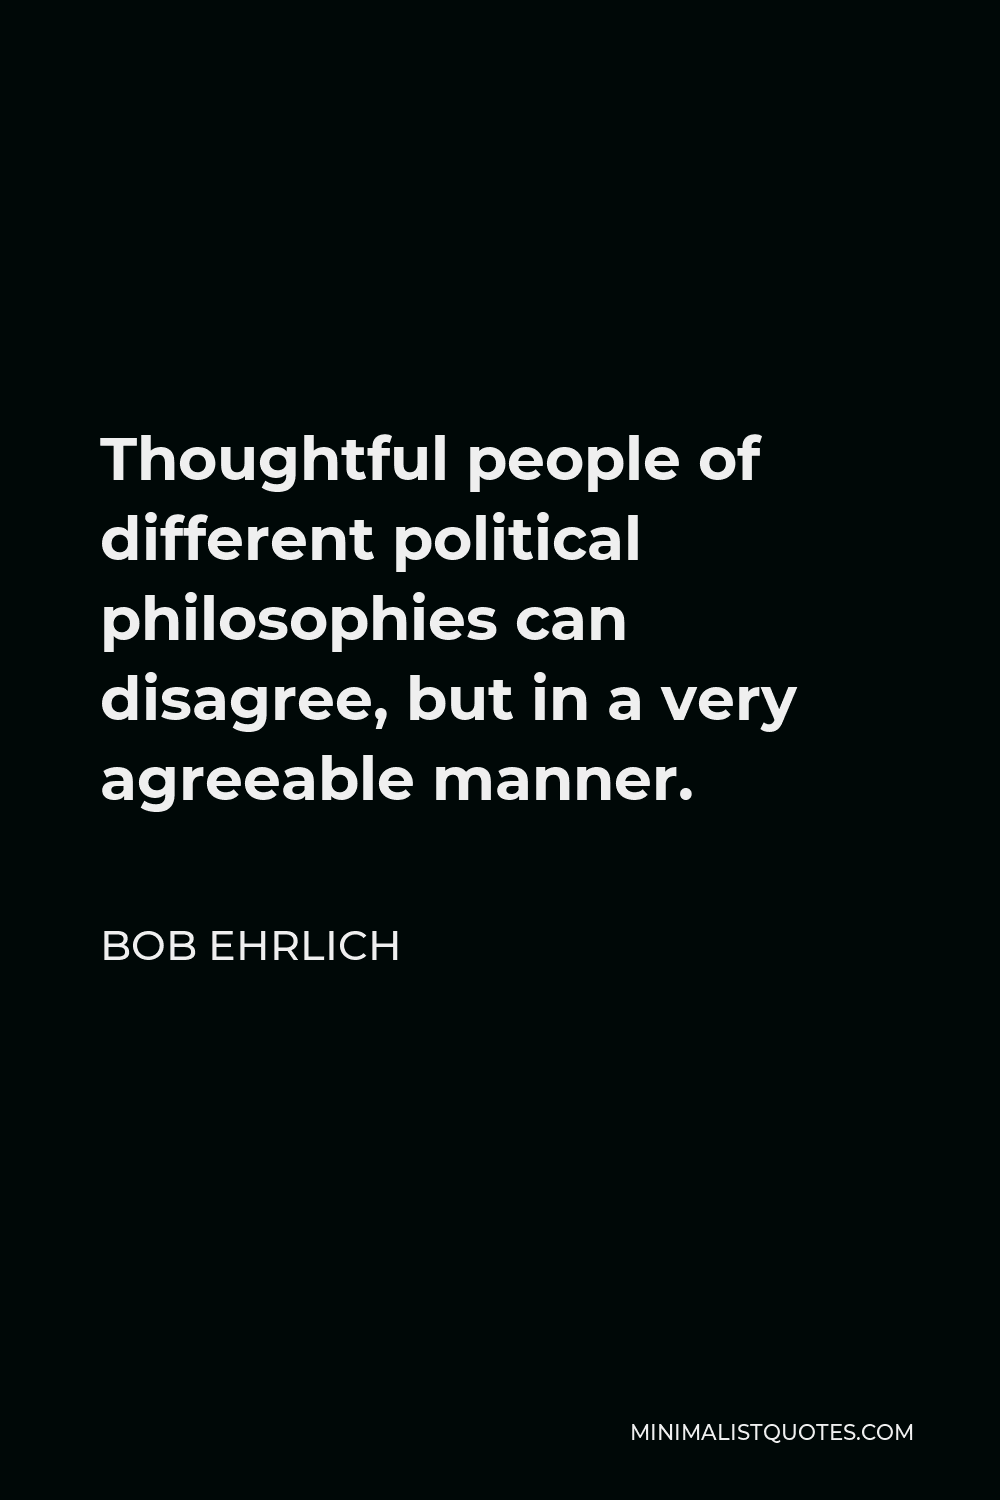 Bob Ehrlich Quote - Thoughtful people of different political philosophies can disagree, but in a very agreeable manner.